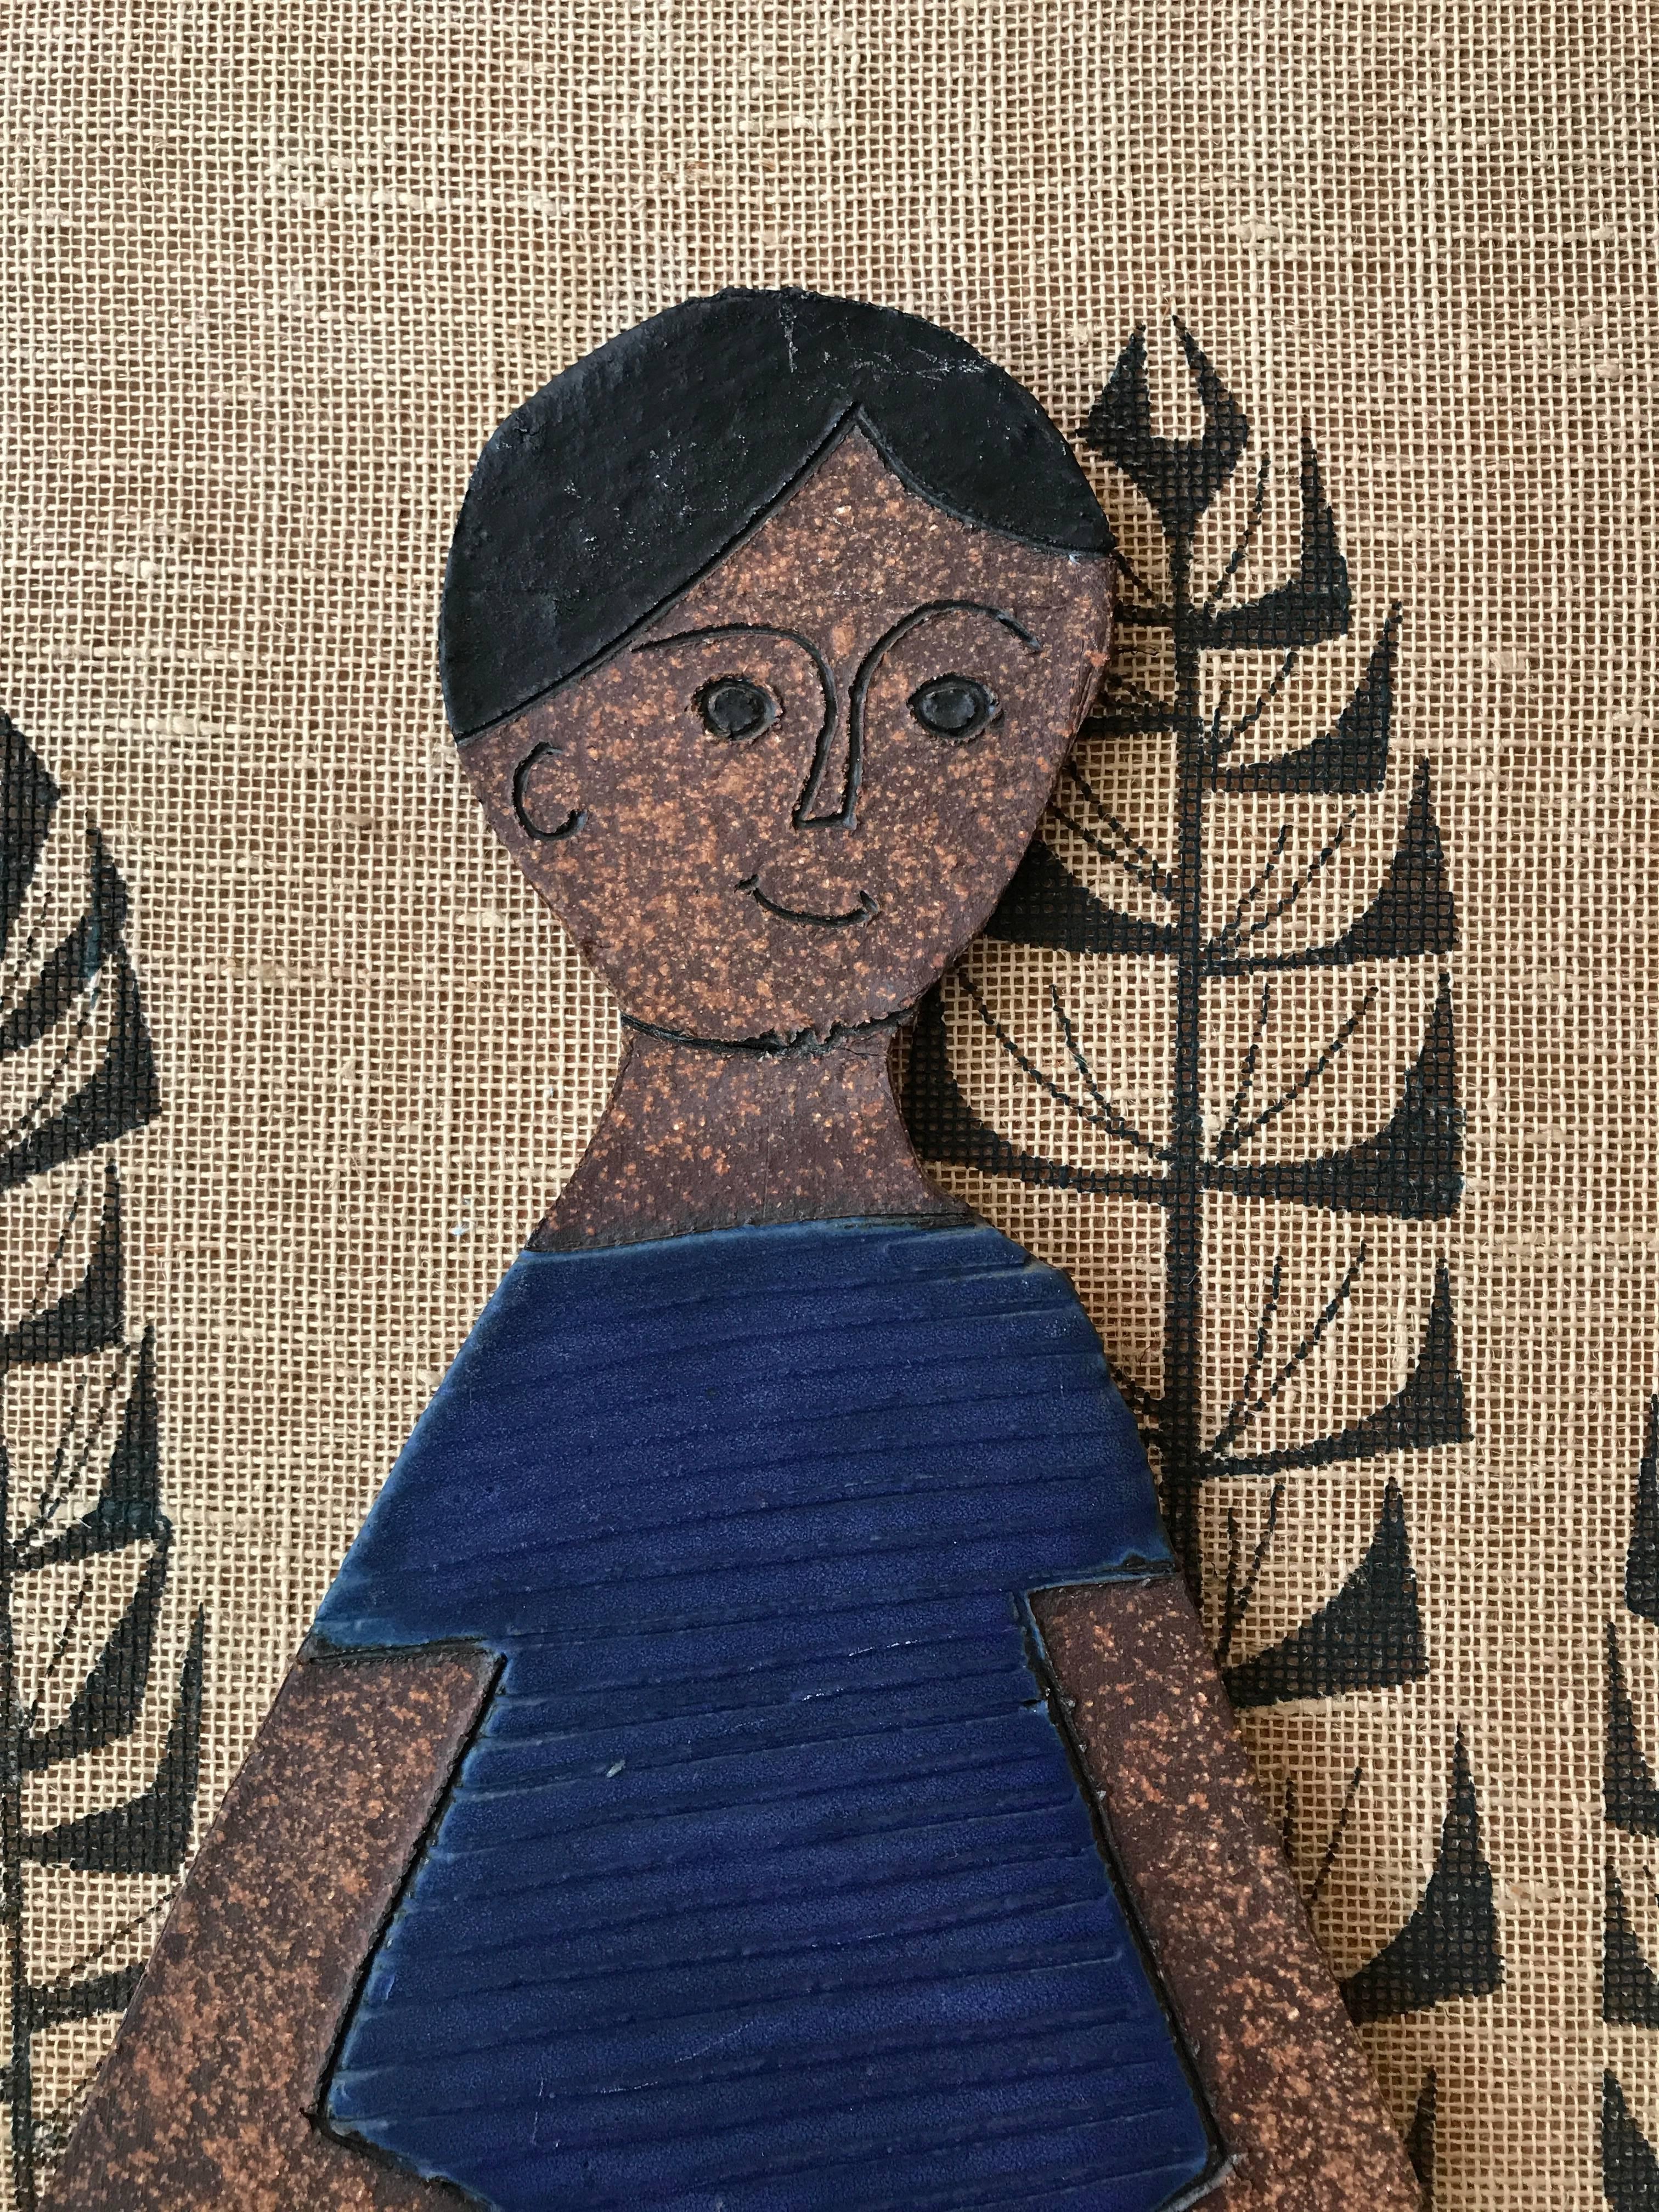 Ceramic figural wall hanging with a silkscreened burlap background by Southern California ceramic artist Raul Coronel. Coronel is known for his amazing range in the ceramic arts, from vessels, furniture and custom large-scale installations in both